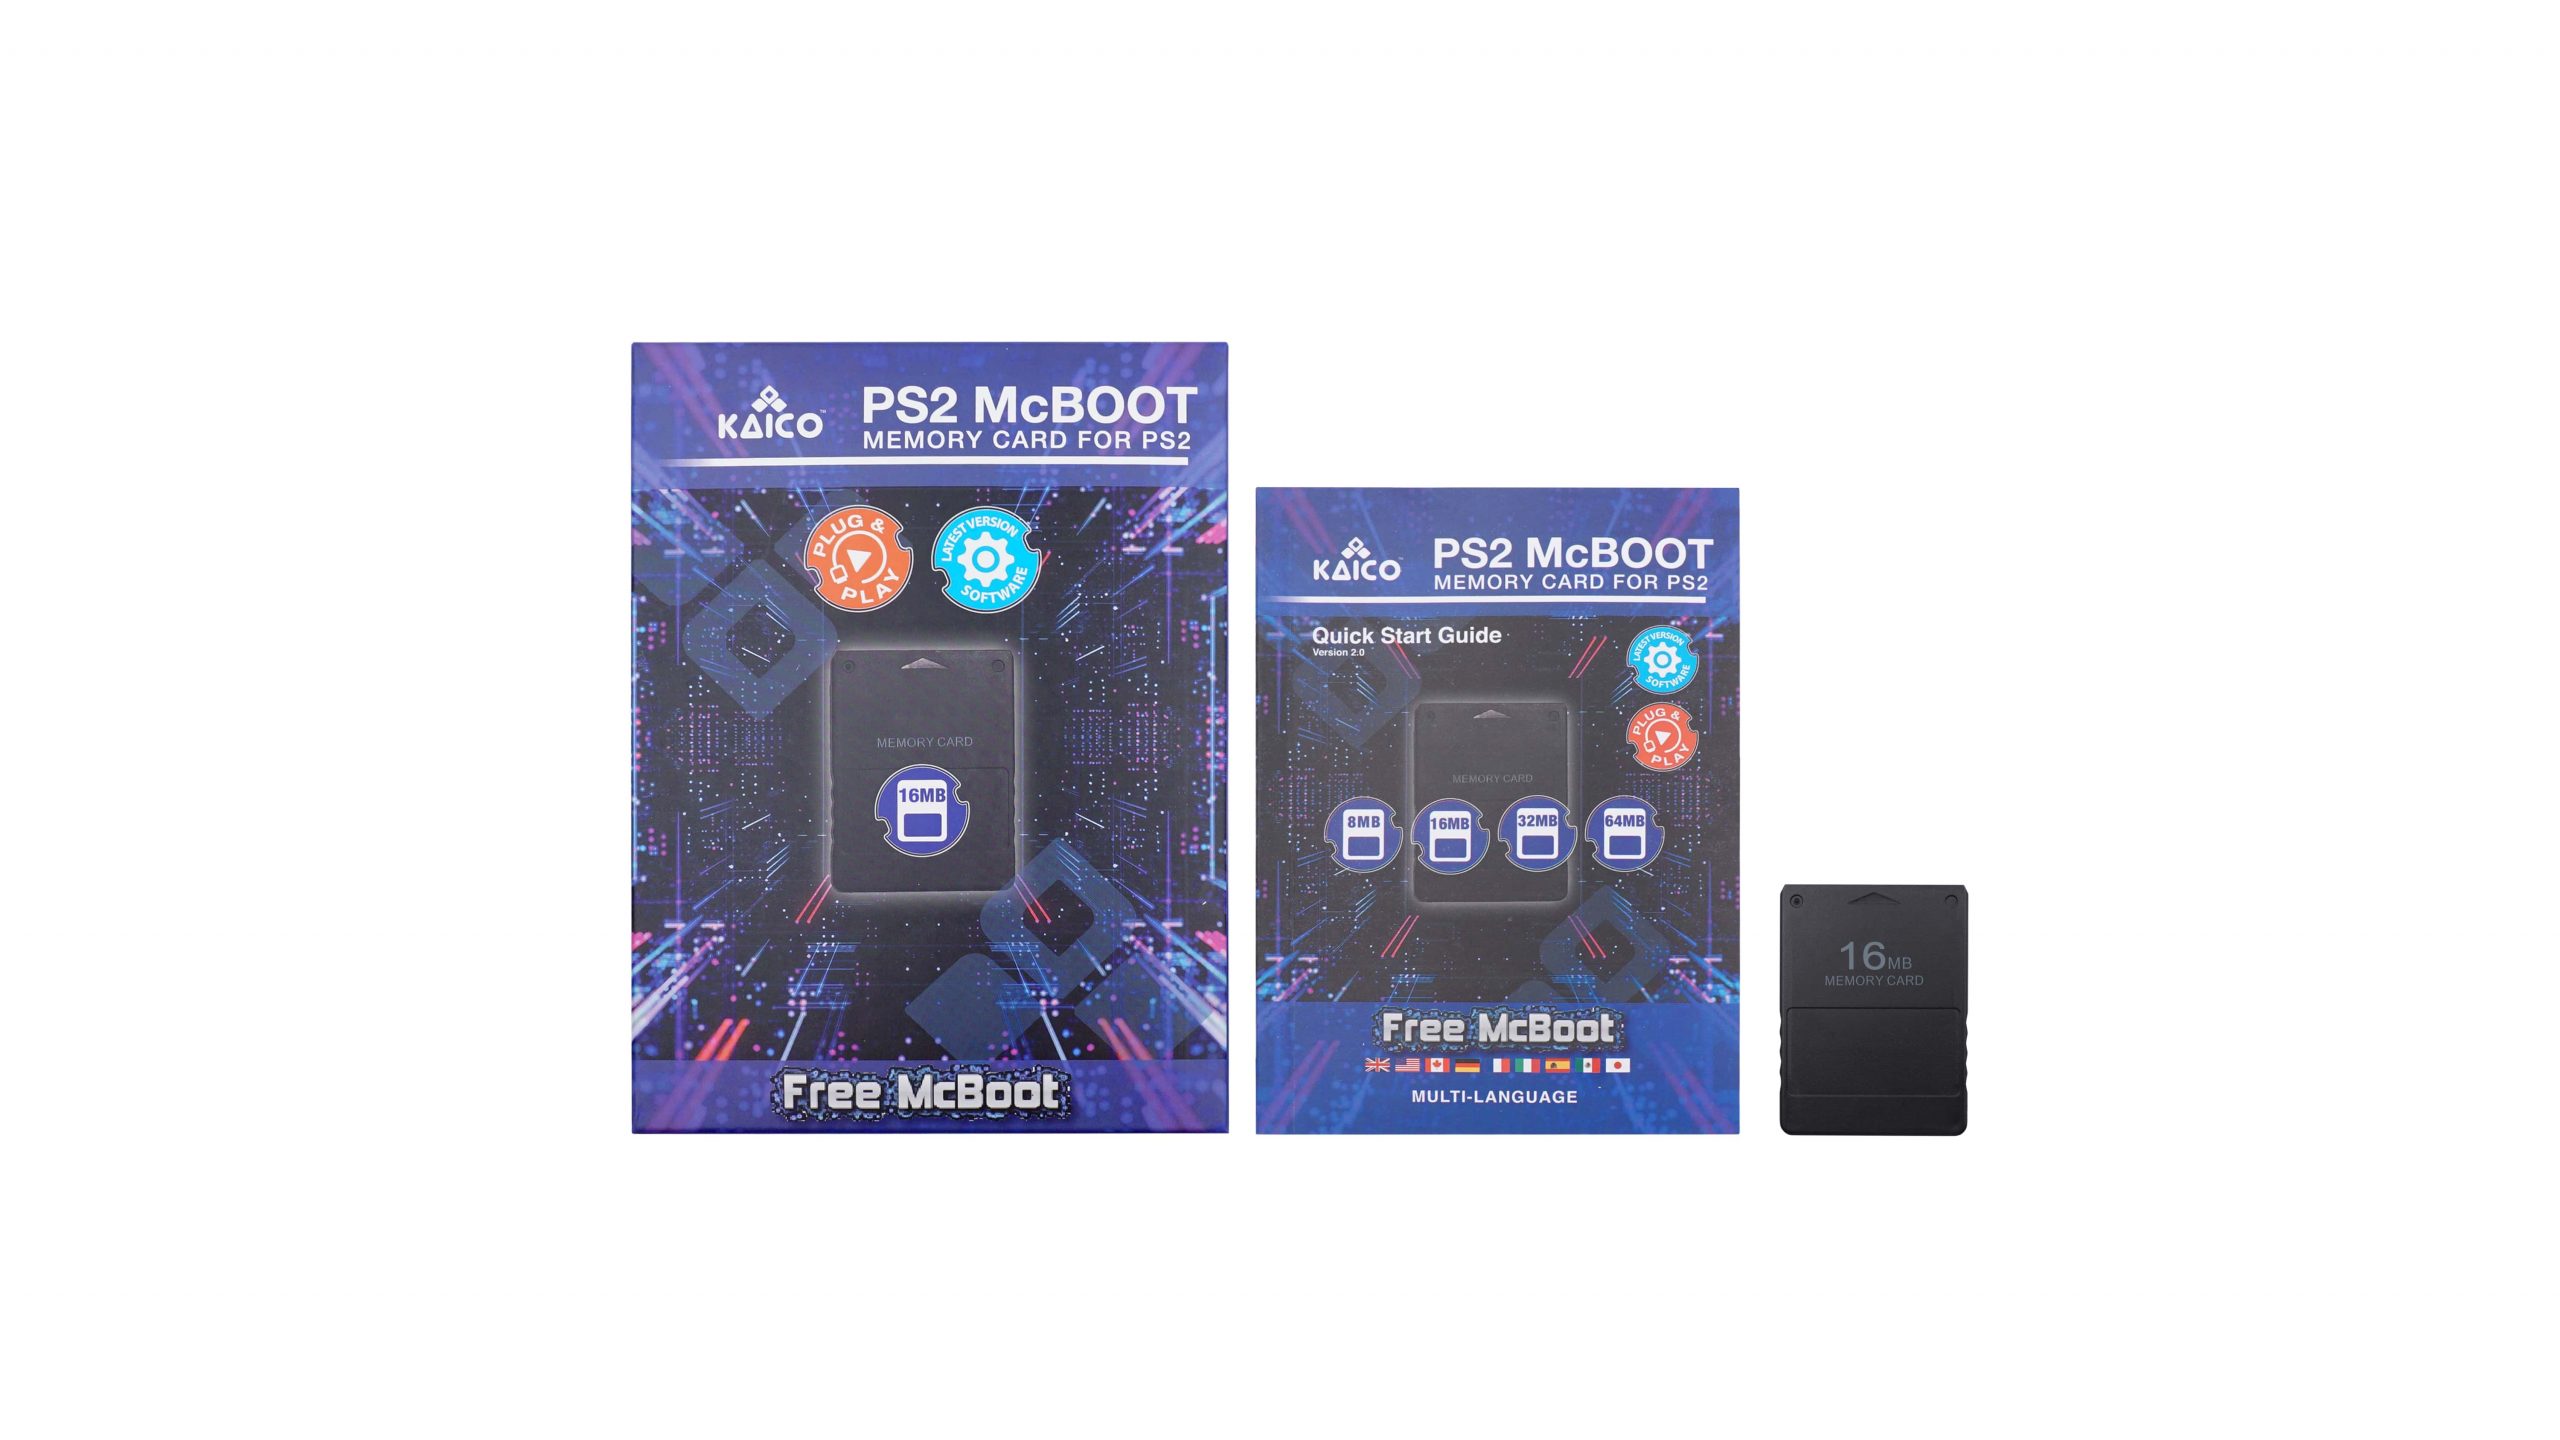 MEMORY CARD PS2 16MB - HC2-10030 - Nelson Games